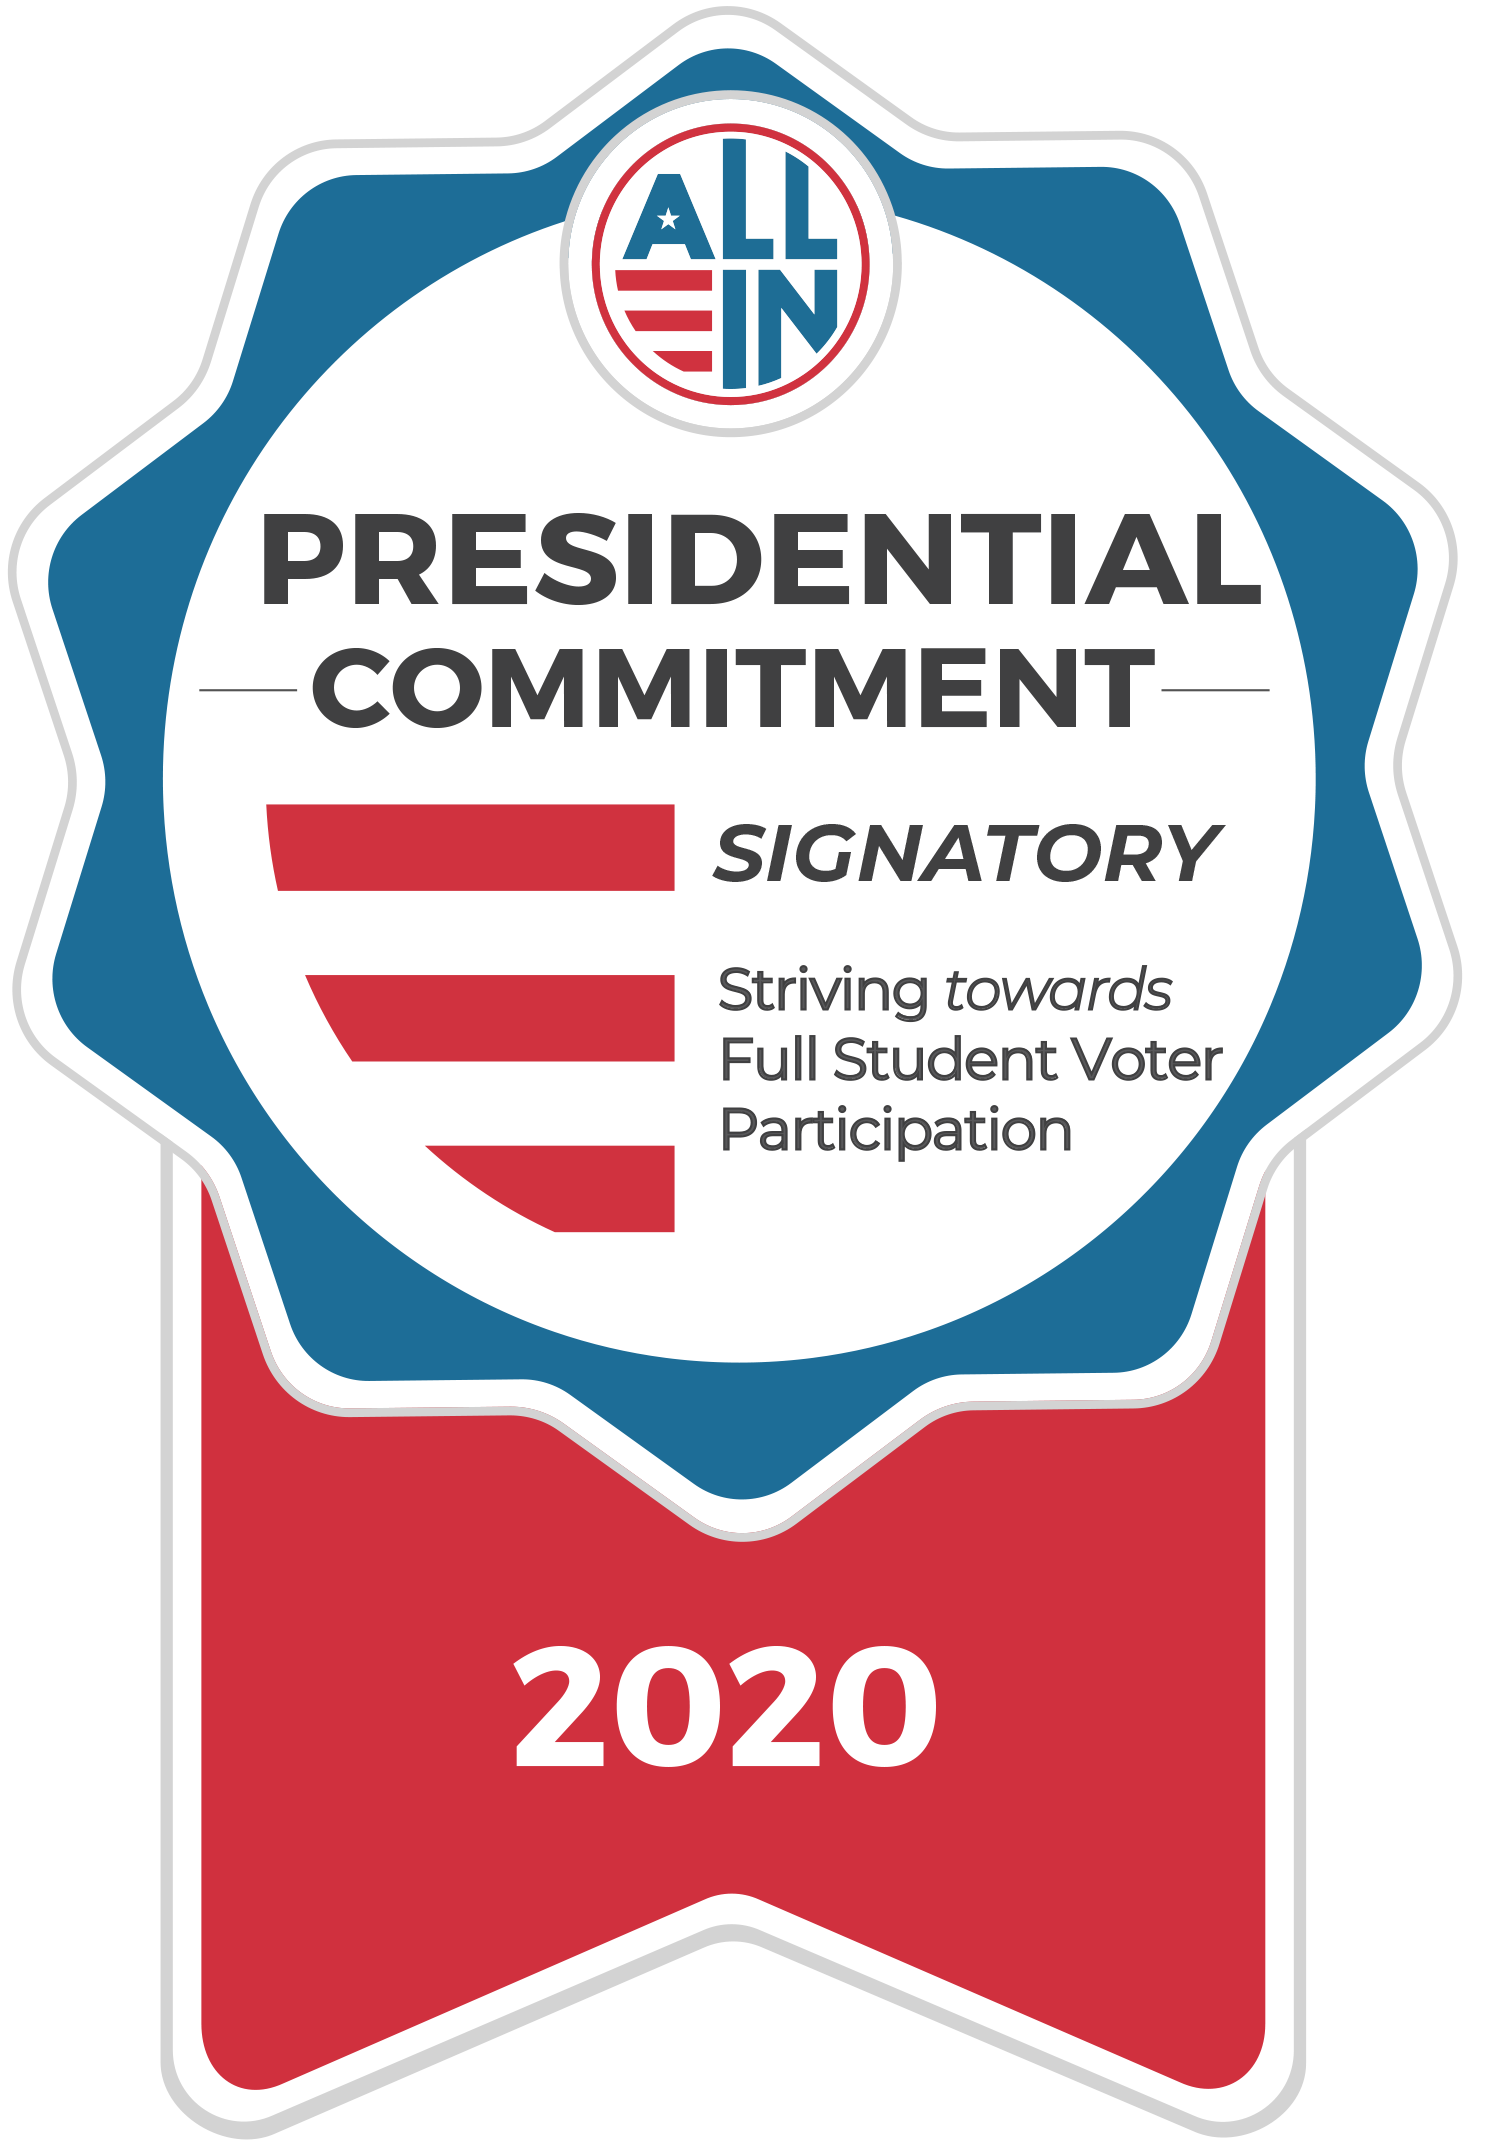 Signatory to the Presidents' Commitment to Full Student Voter Participation